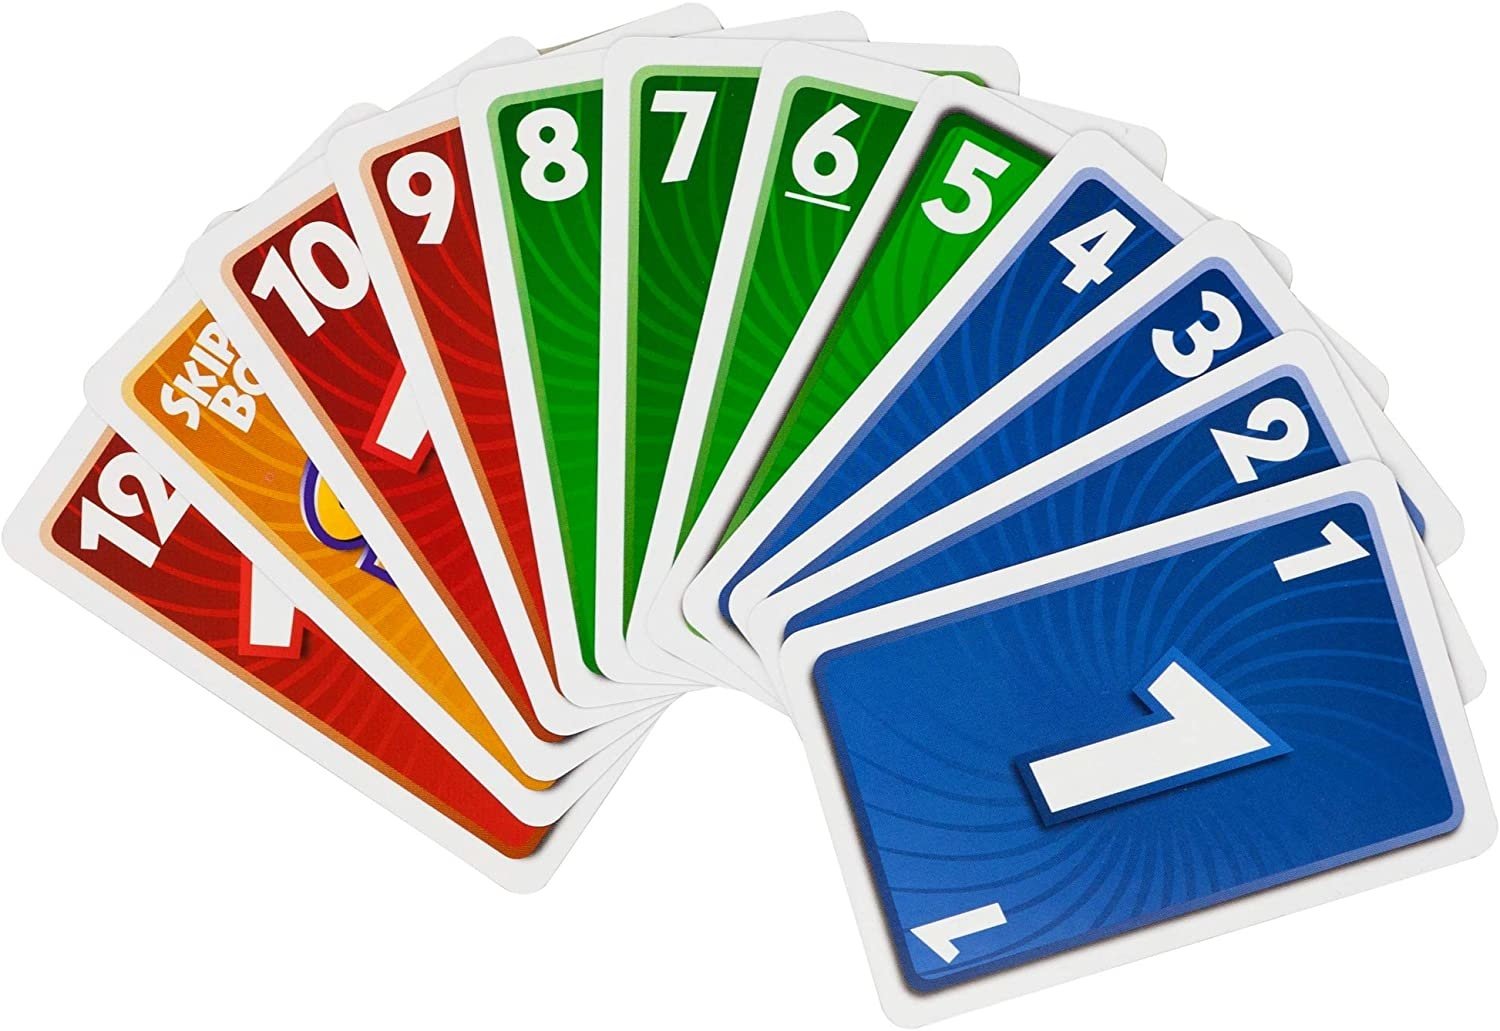 SKIP BO Card Game-162 cards-NEW from Mattel Games 